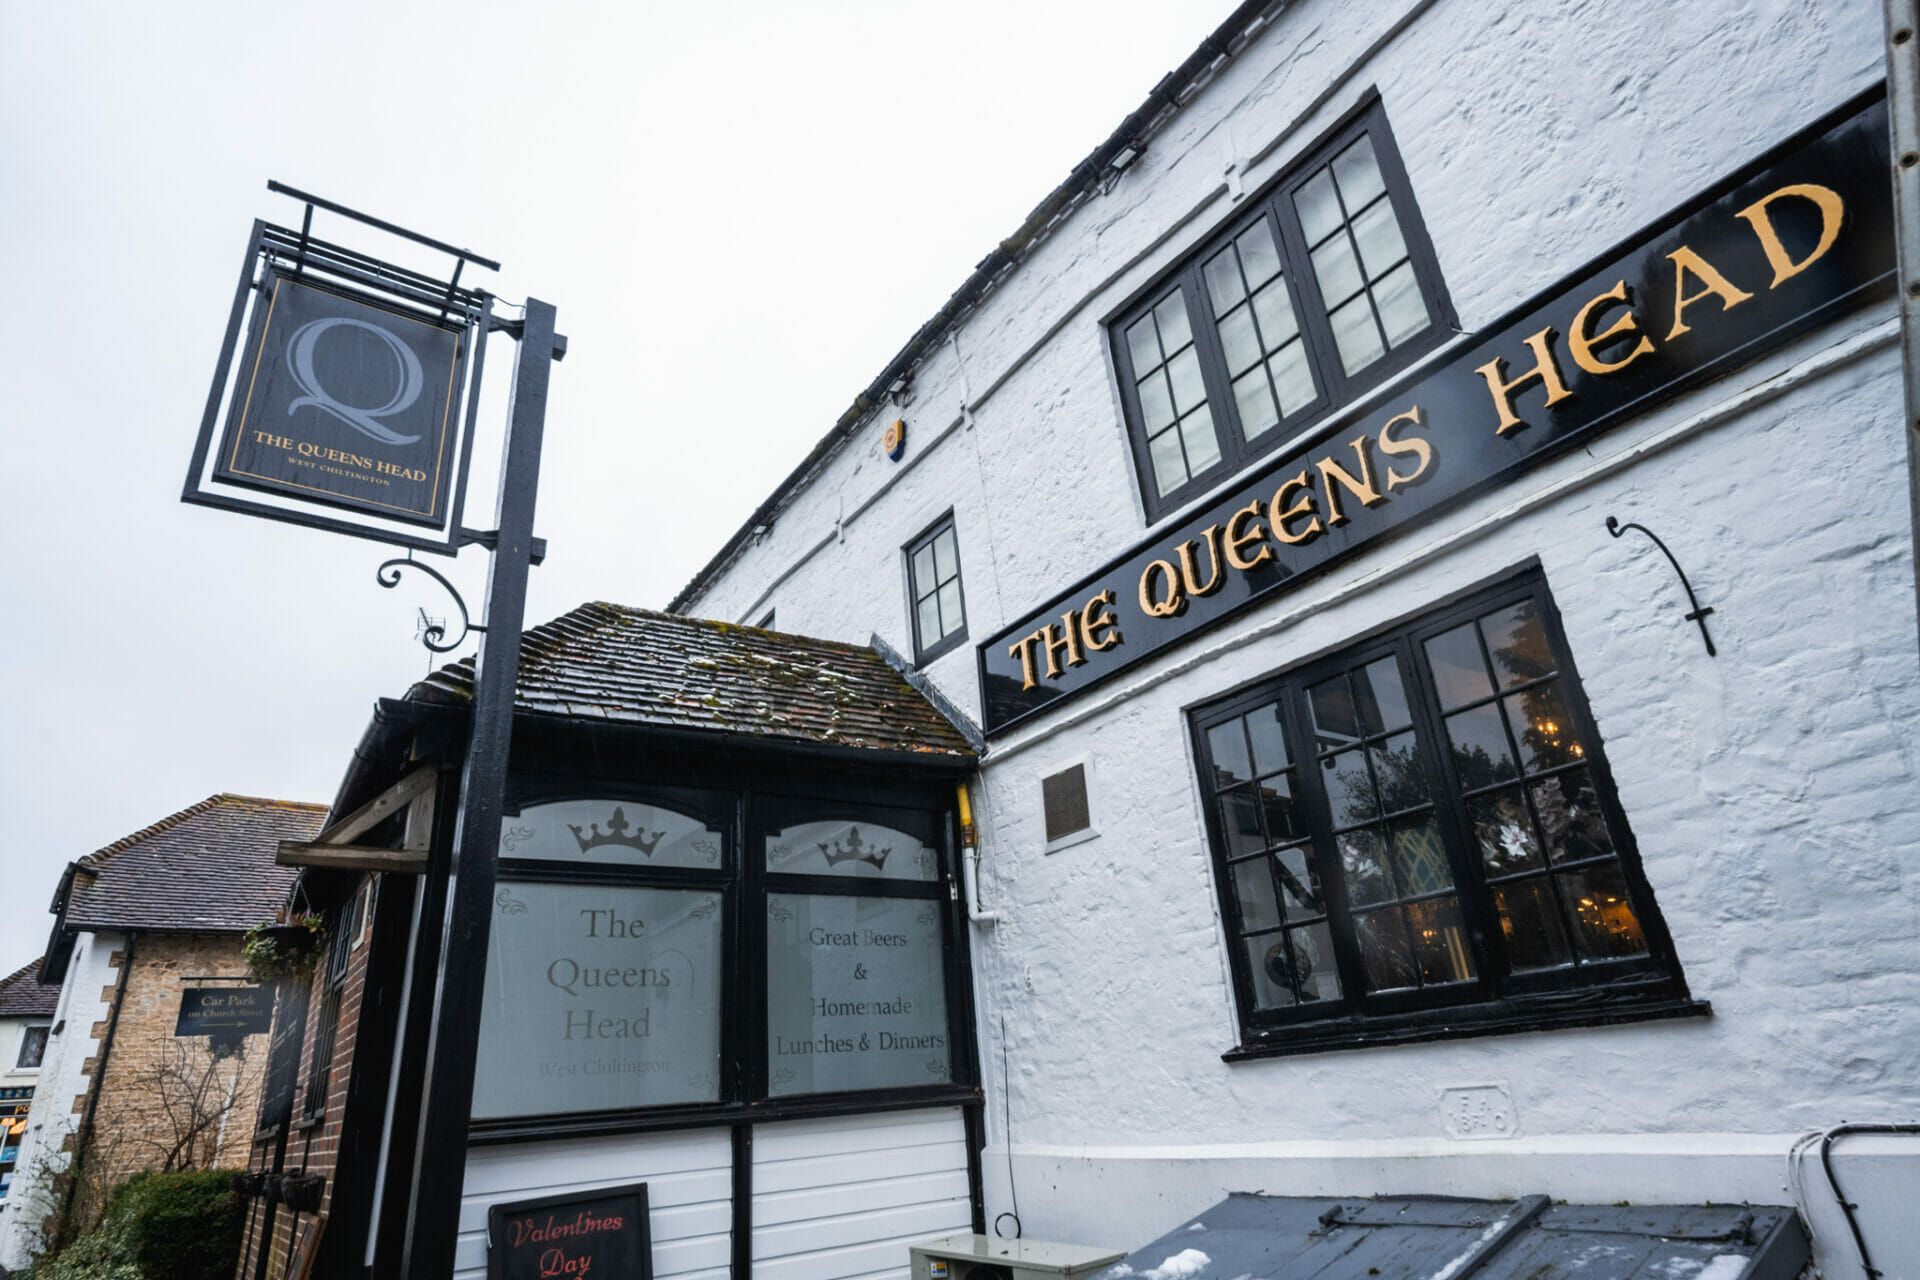 Pubs To Let In West Chiltington – The Queens Head Is Available !